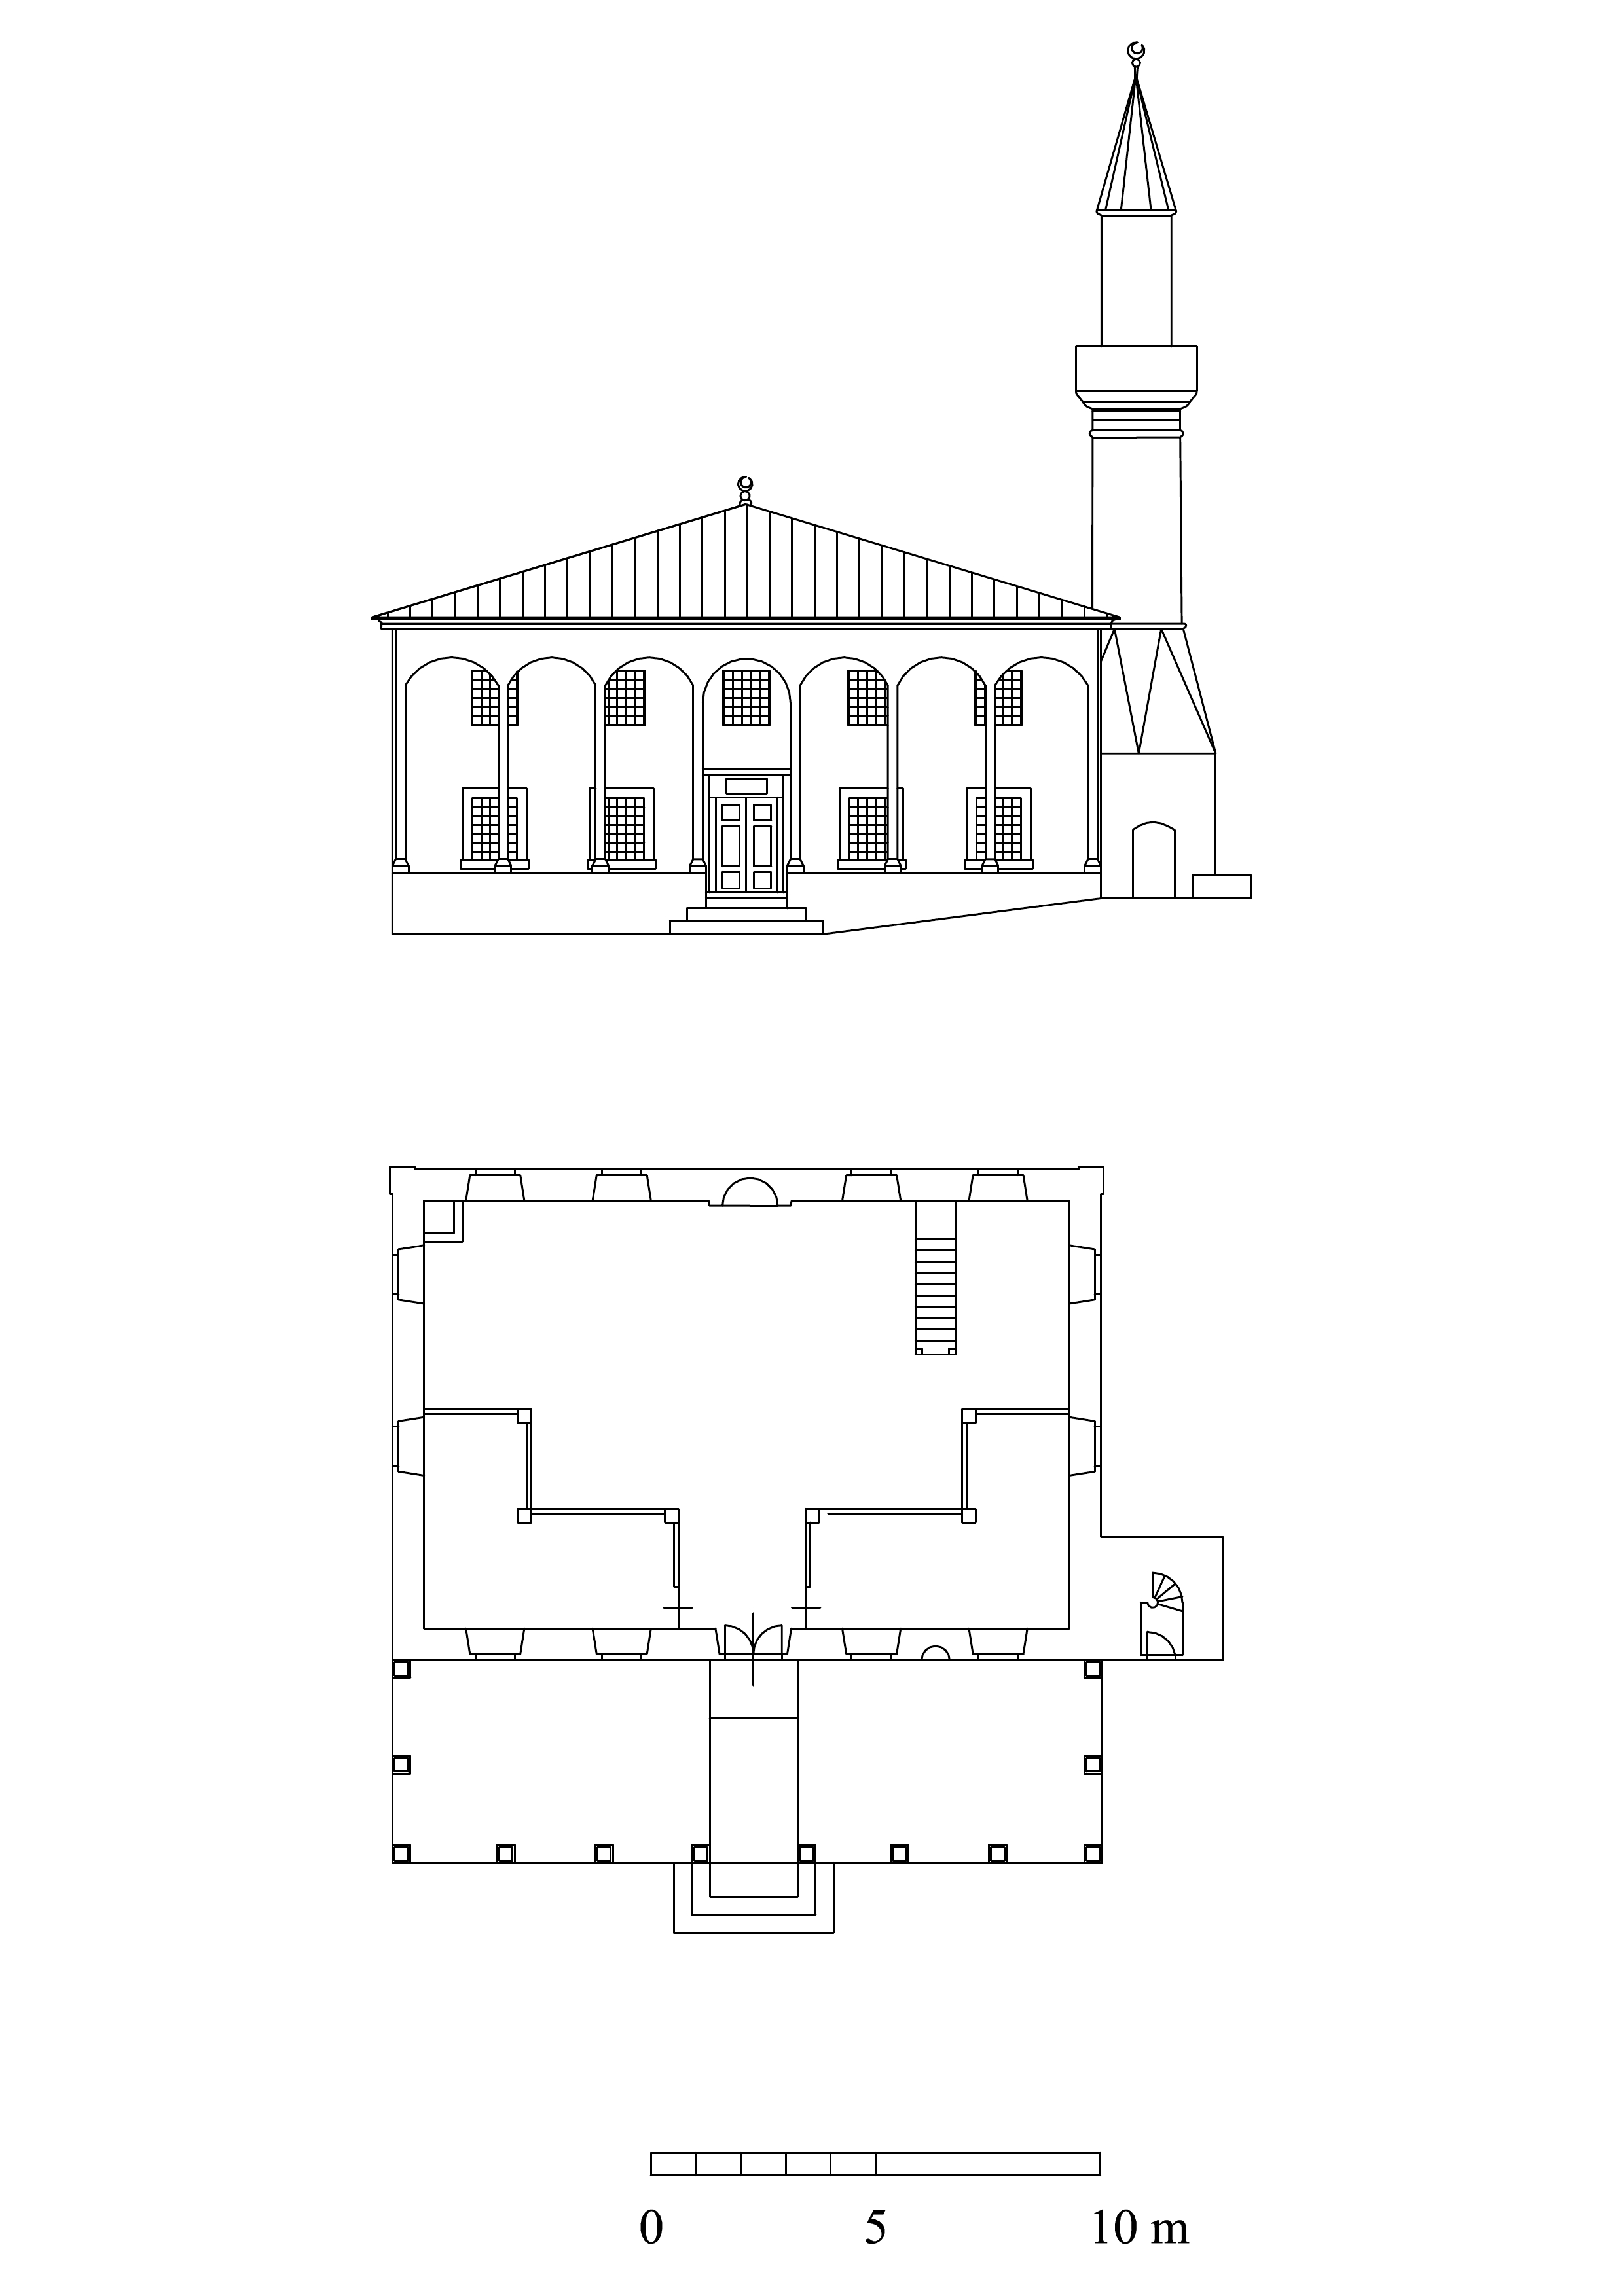 Semiz Ali Paşa Camii - Floor plan and cross-section of mosque. DWG file in AutoCAD 2000 format. Click the download button to download a zipped file containing the .dwg file.